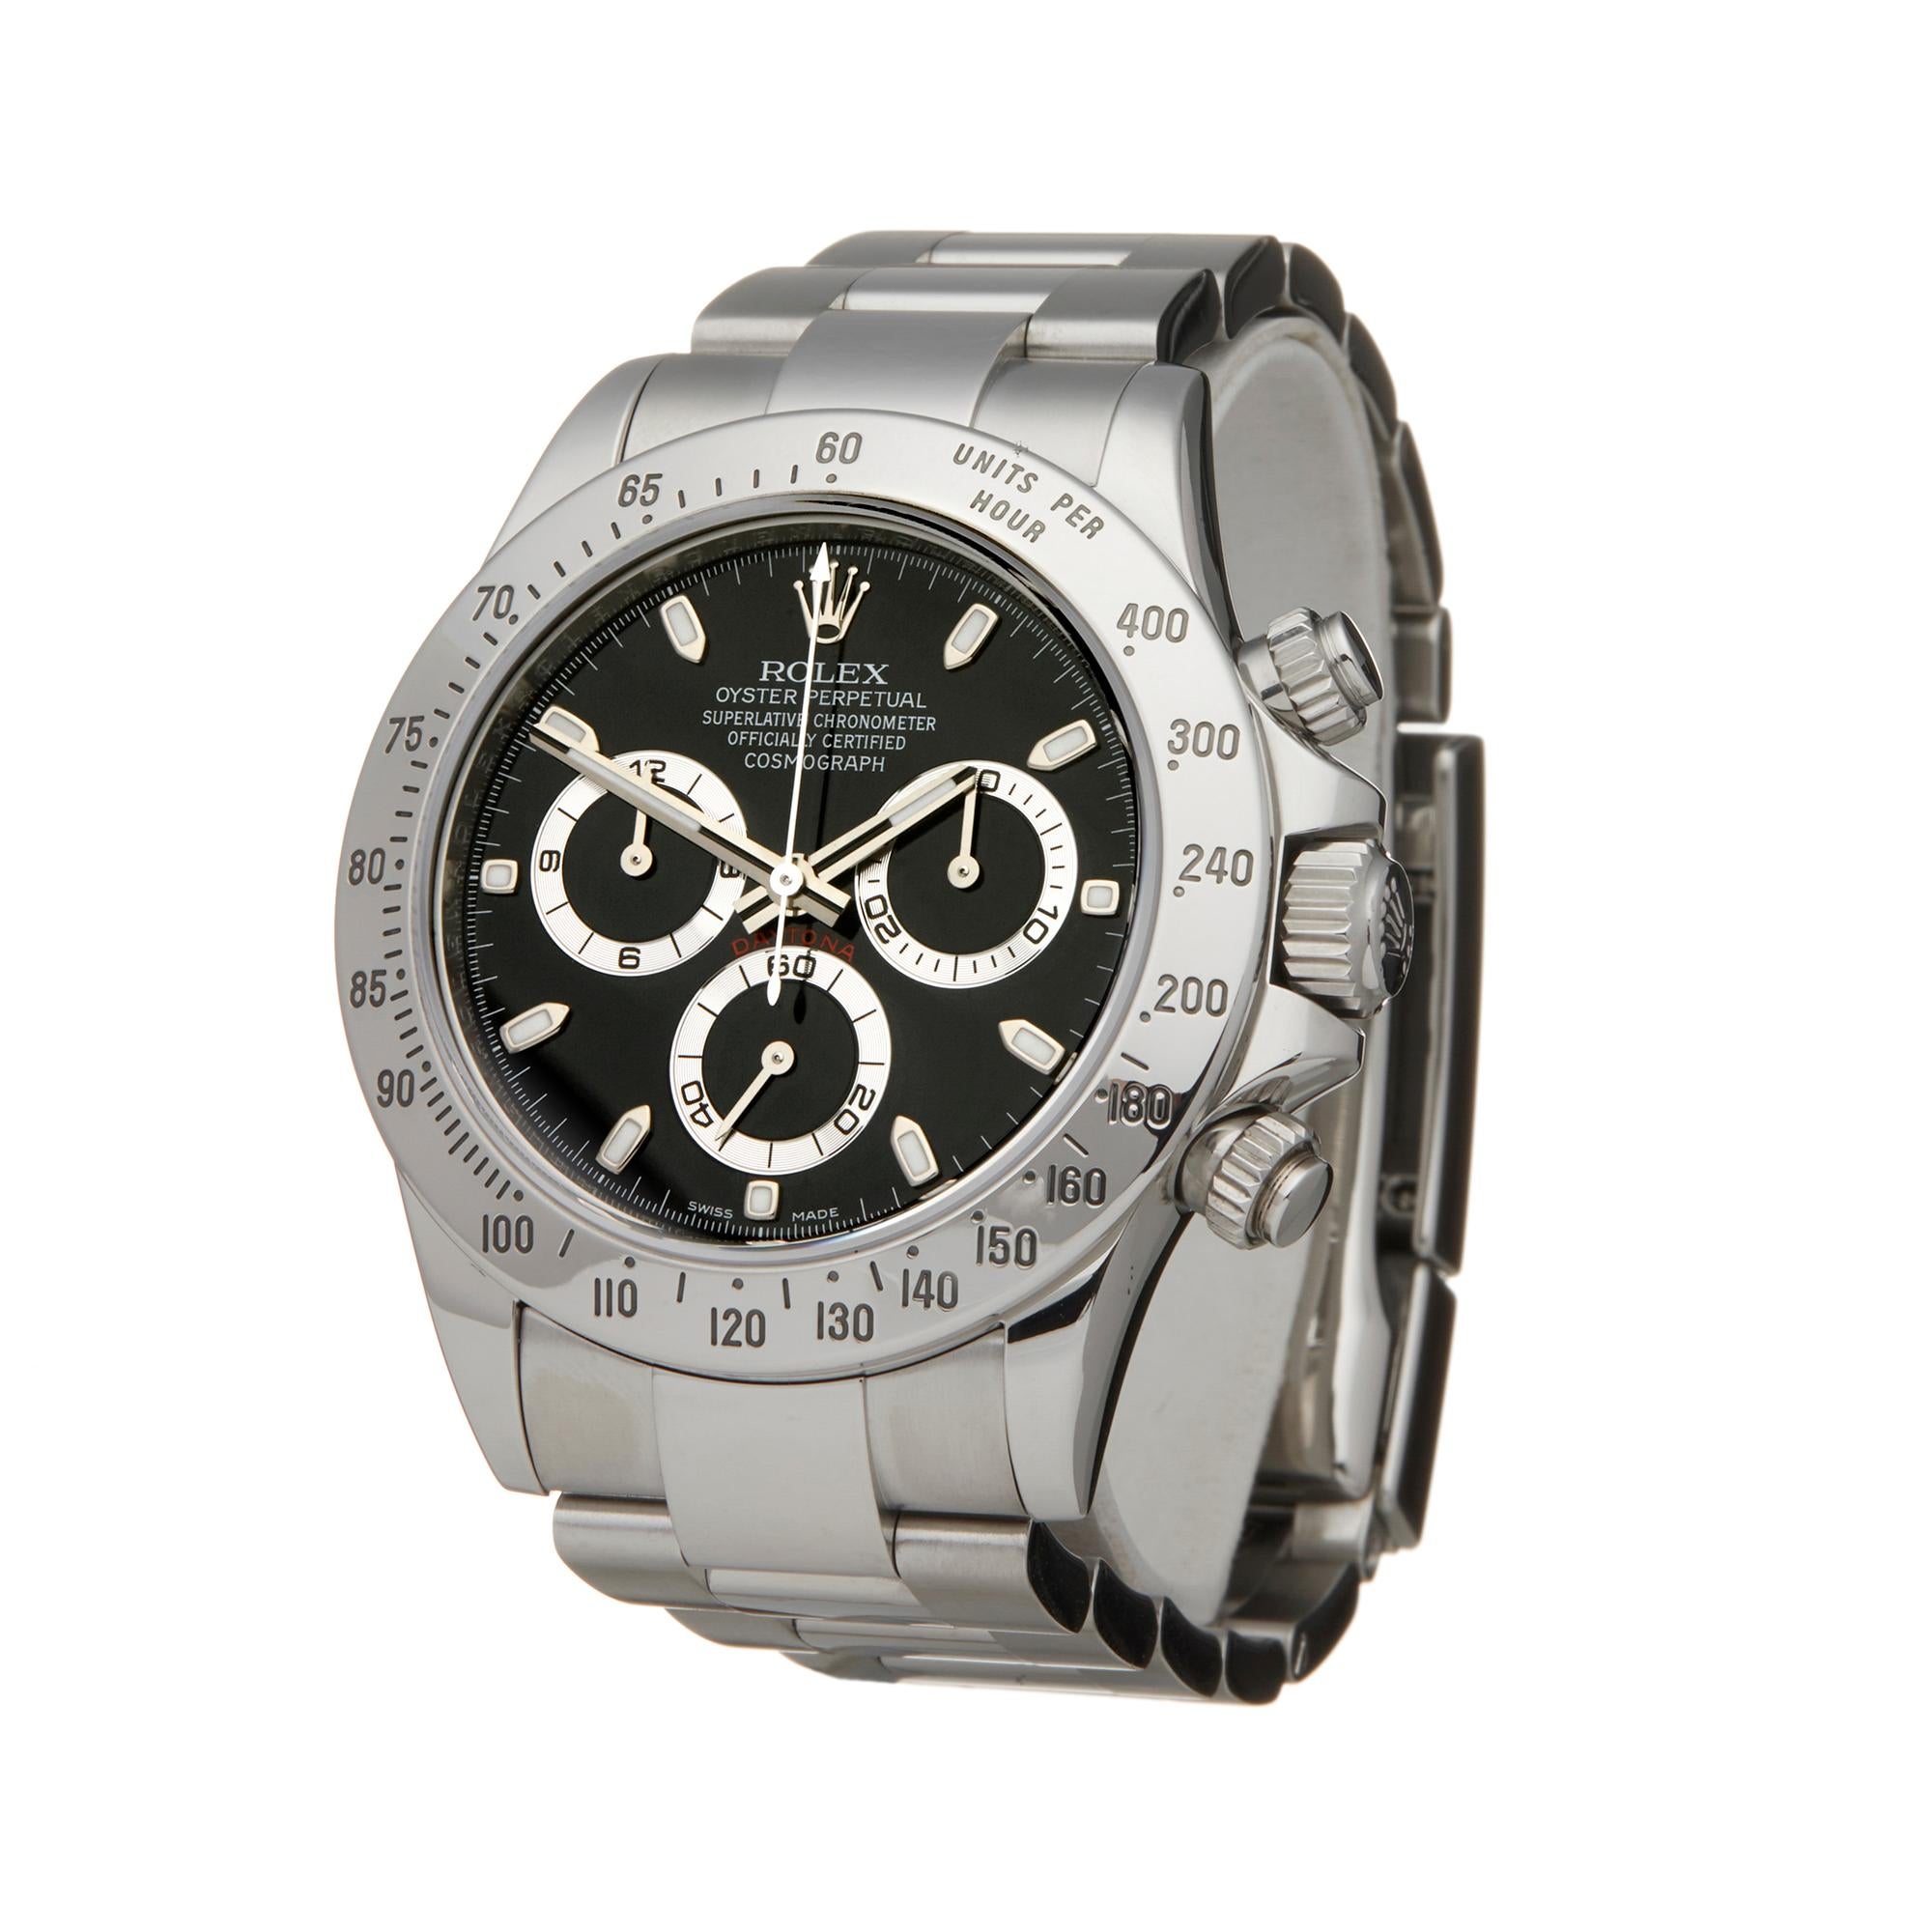 Reference: W6060
Manufacturer: Rolex
Model: Daytona
Model Reference: 116520
Age: 13th February 2013
Gender: Men's
Box and Papers: Box, Guarantee and Swing Tags
Dial: Black Baton
Glass: Sapphire Crystal
Movement: Automatic
Water Resistance: To